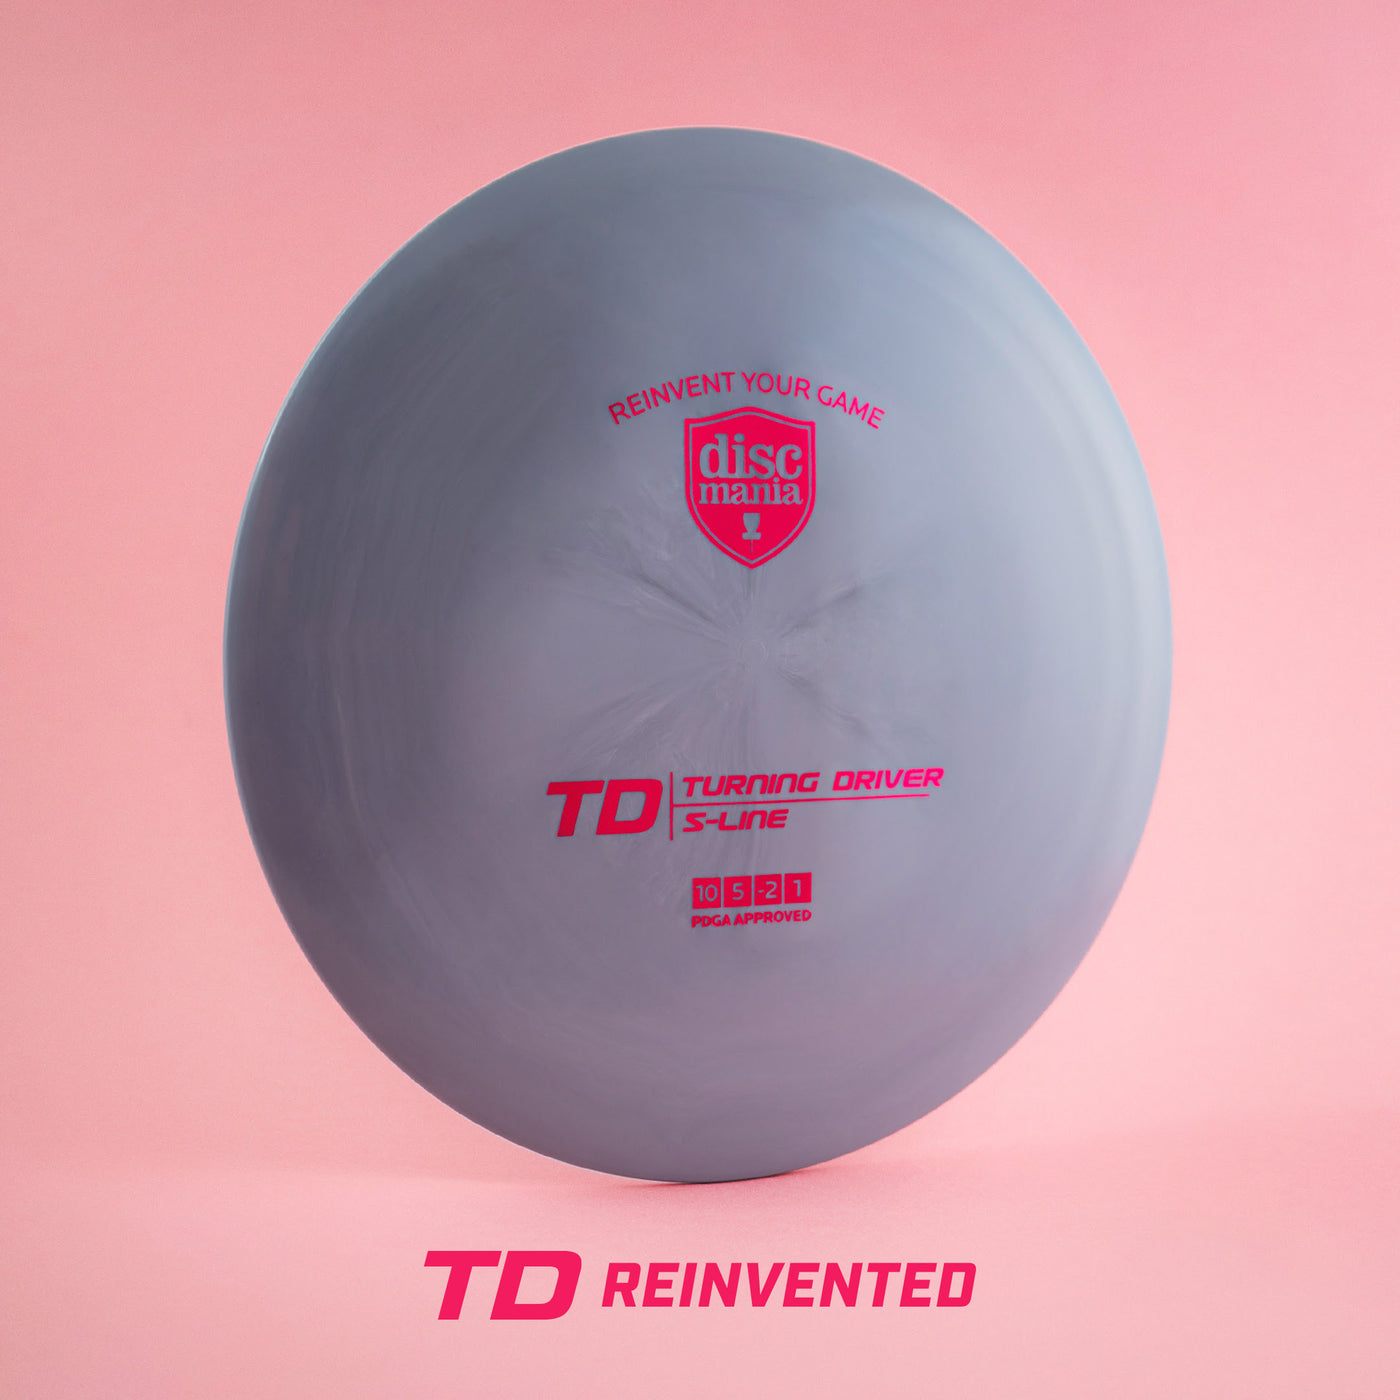 Discmania S-Line Reinvented TD Reinvented Distance Driver - Speed 10